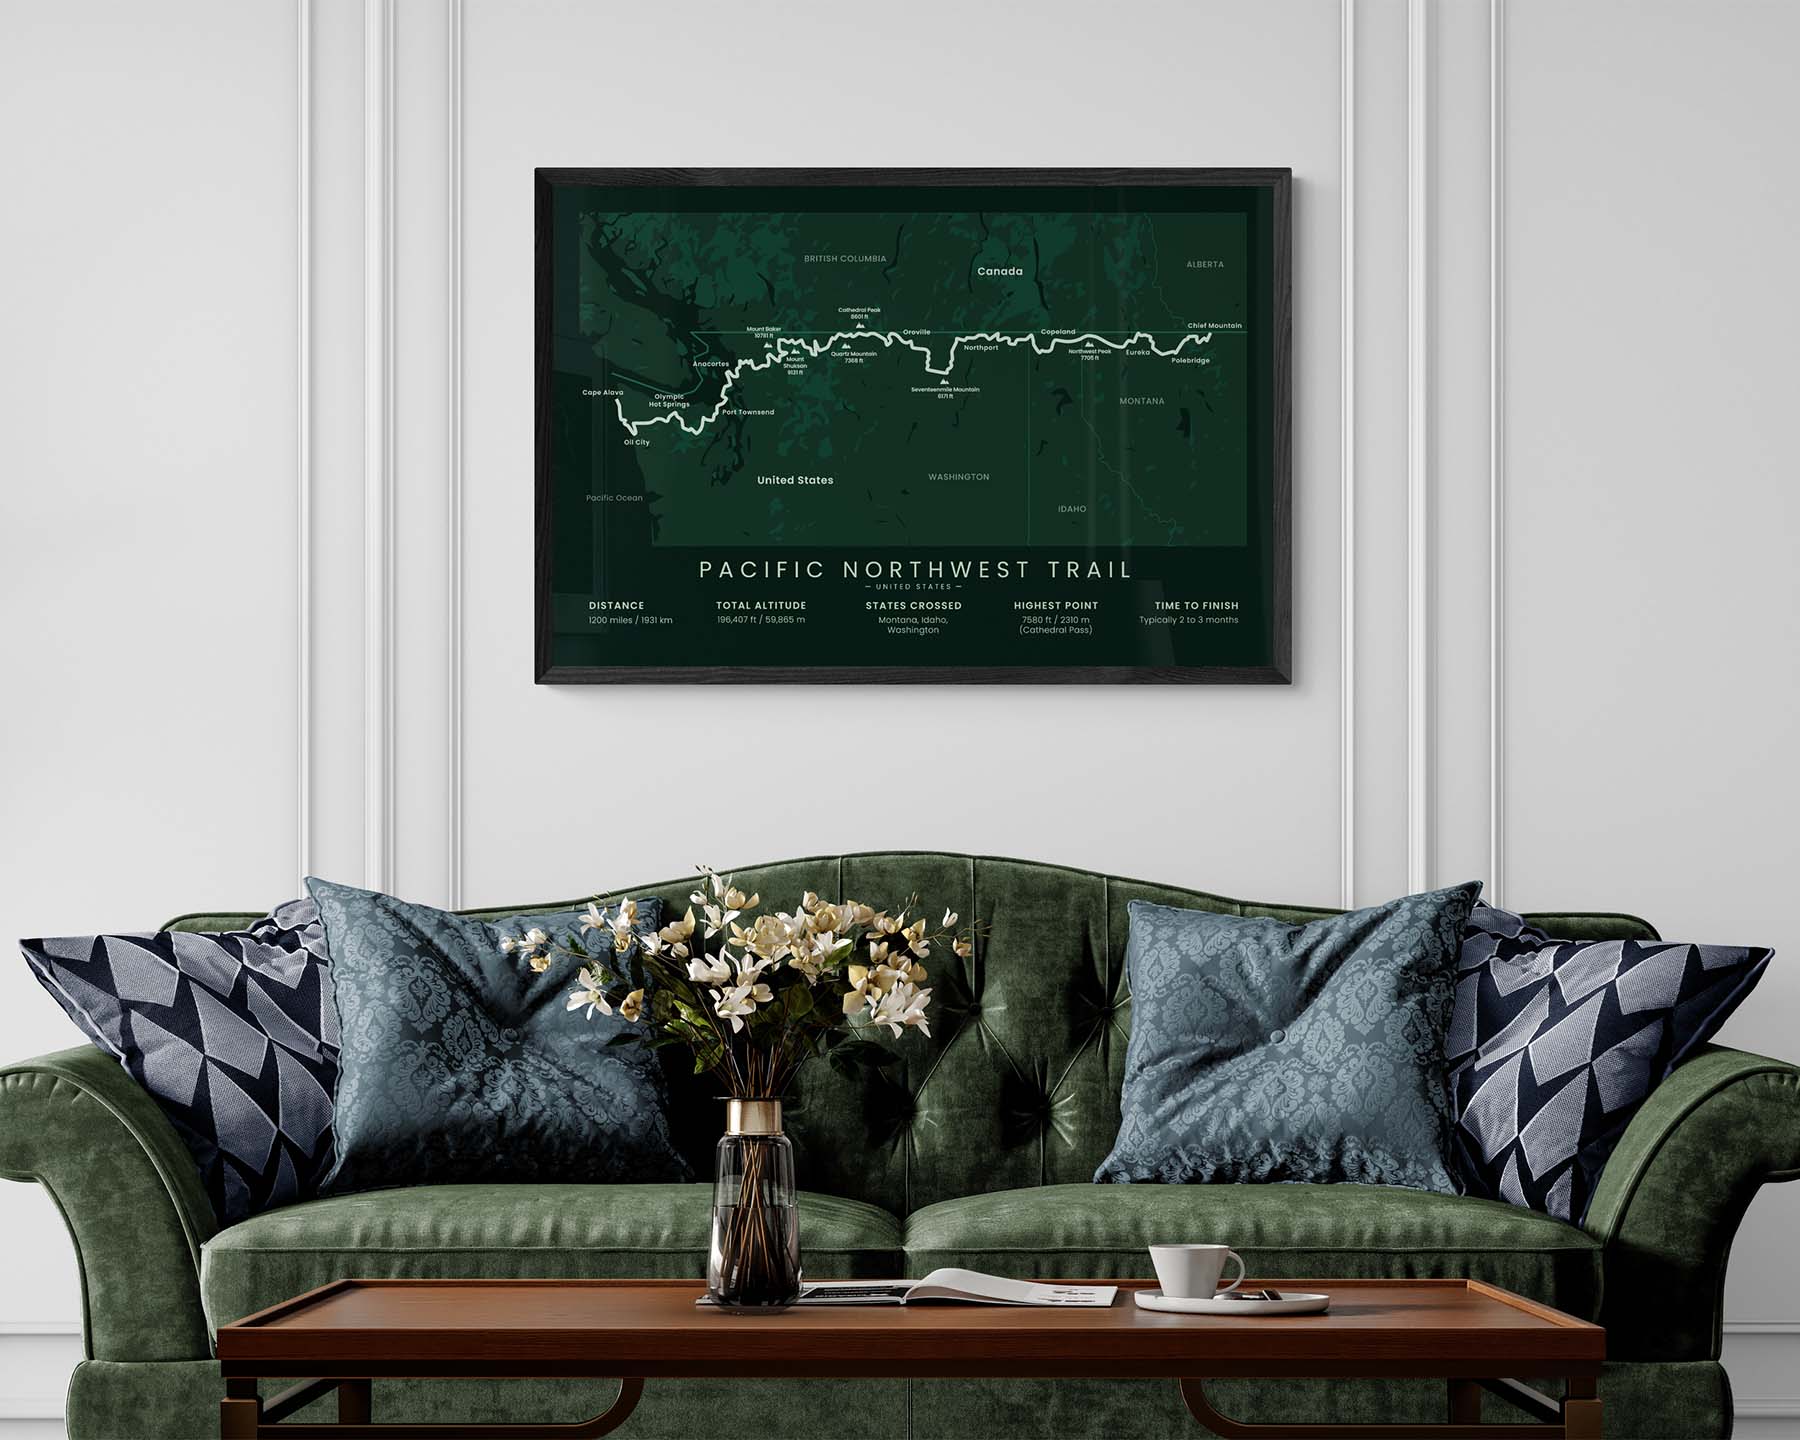 Pacific Northwest Trail (Montana) Trail Wall Art in Minimal Living Room Decor